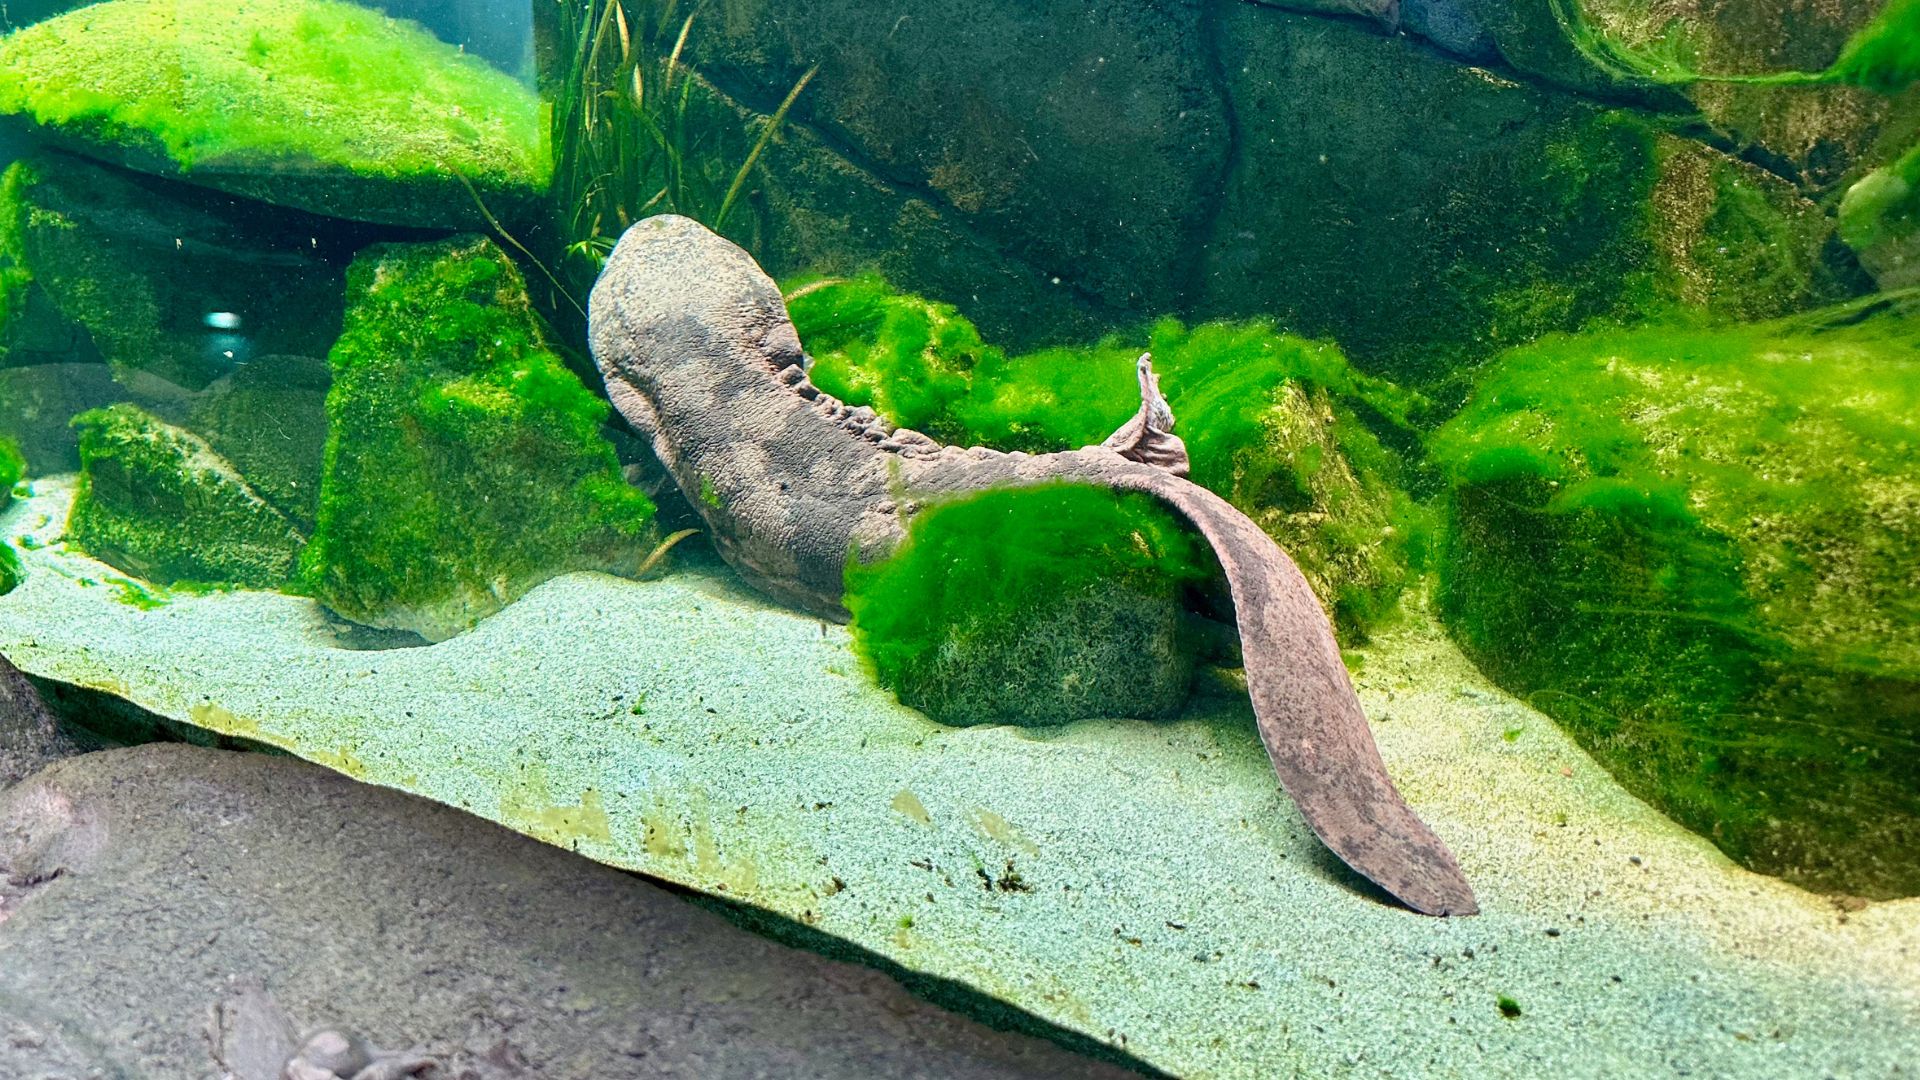 Chinese giant salamanders can reach lengths of 1.8 meters. /Kitty Logan/CGTN